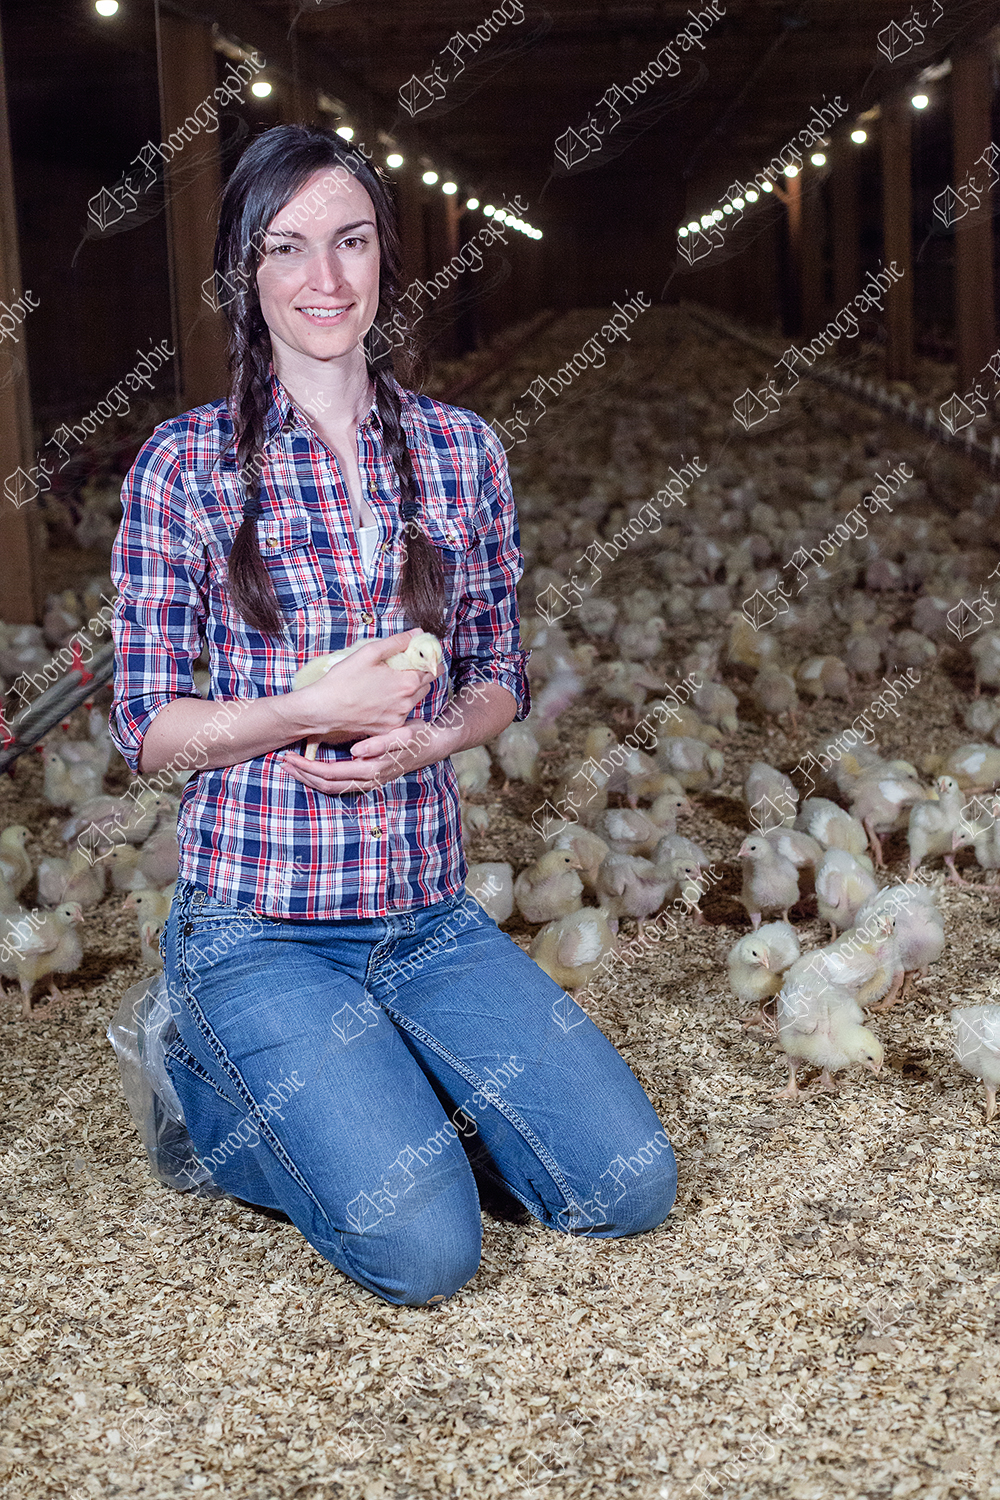 elze_photo_9084_poulailler_elevage_poussin_farmer_girl_chickens